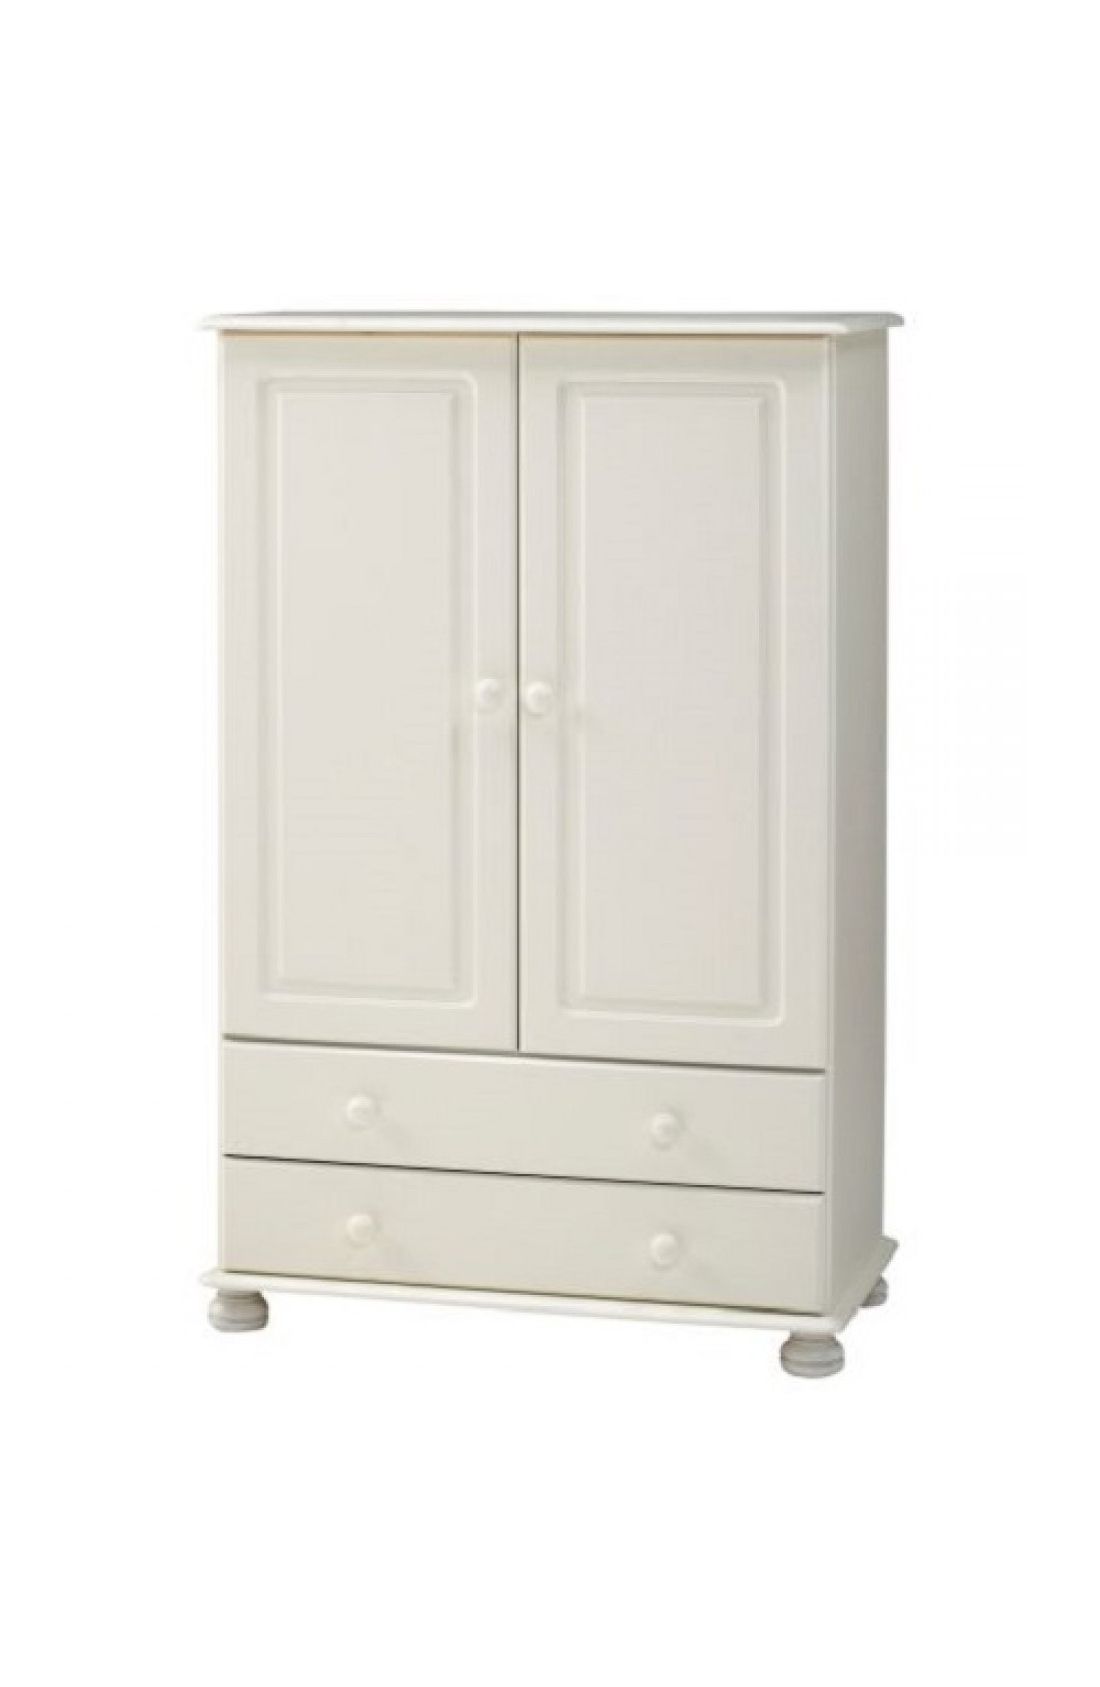 Small Tallboy Wardrobes With Best And Newest Richmond 2 Door 2 Drawer Short Low Tallboy Wardrobe – White (View 2 of 15)